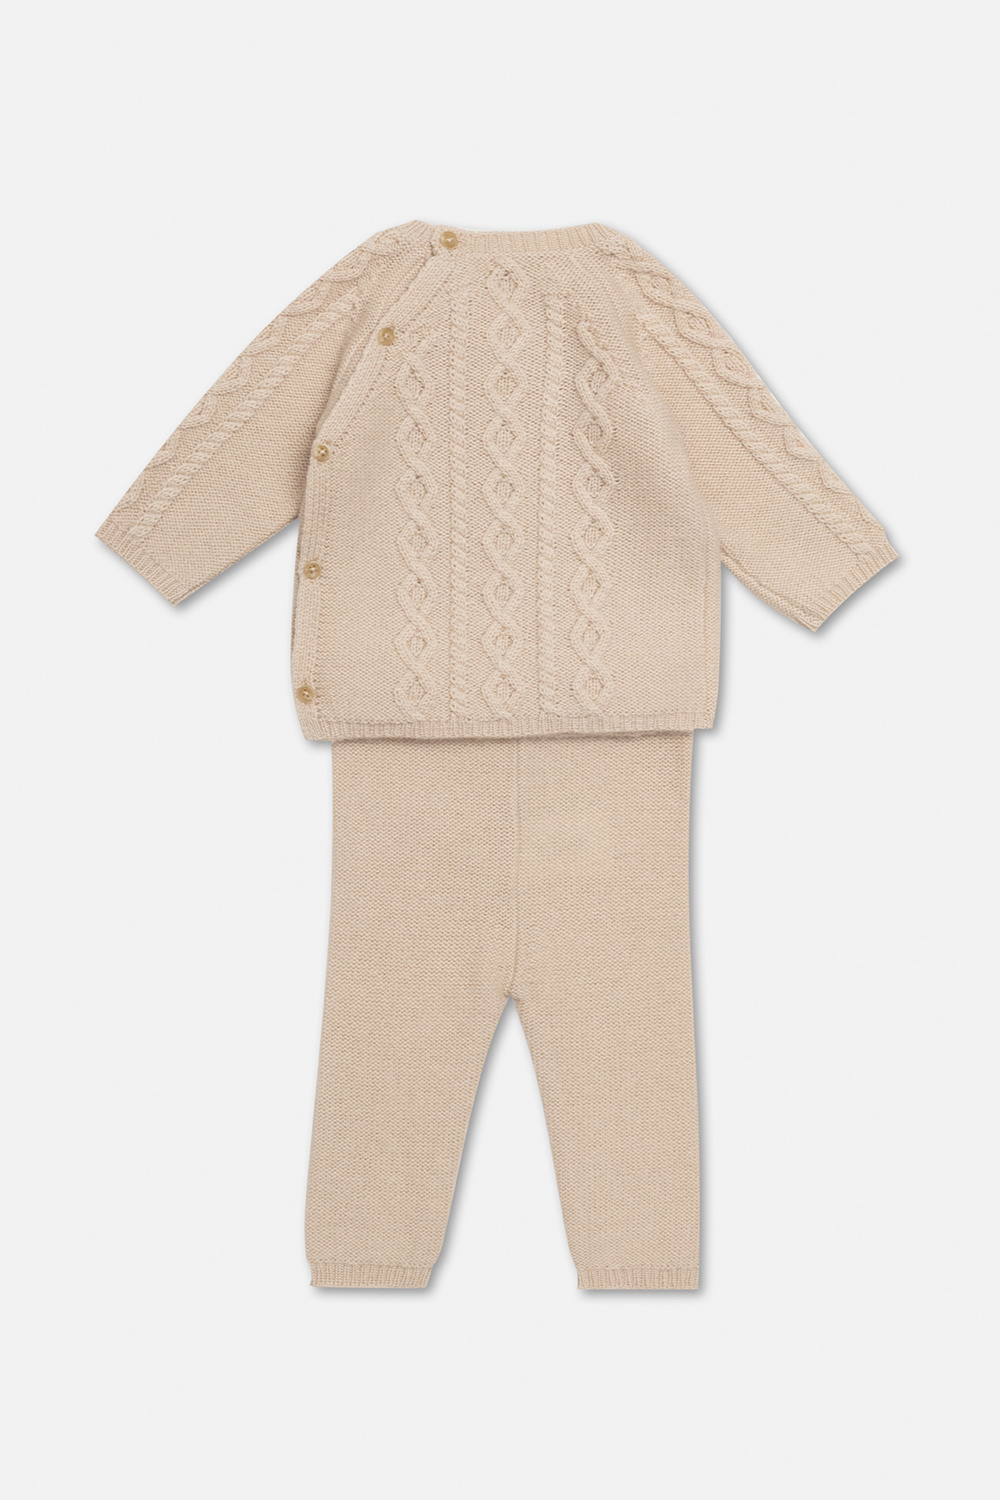 Bonpoint  Sweater & trousers outfit set